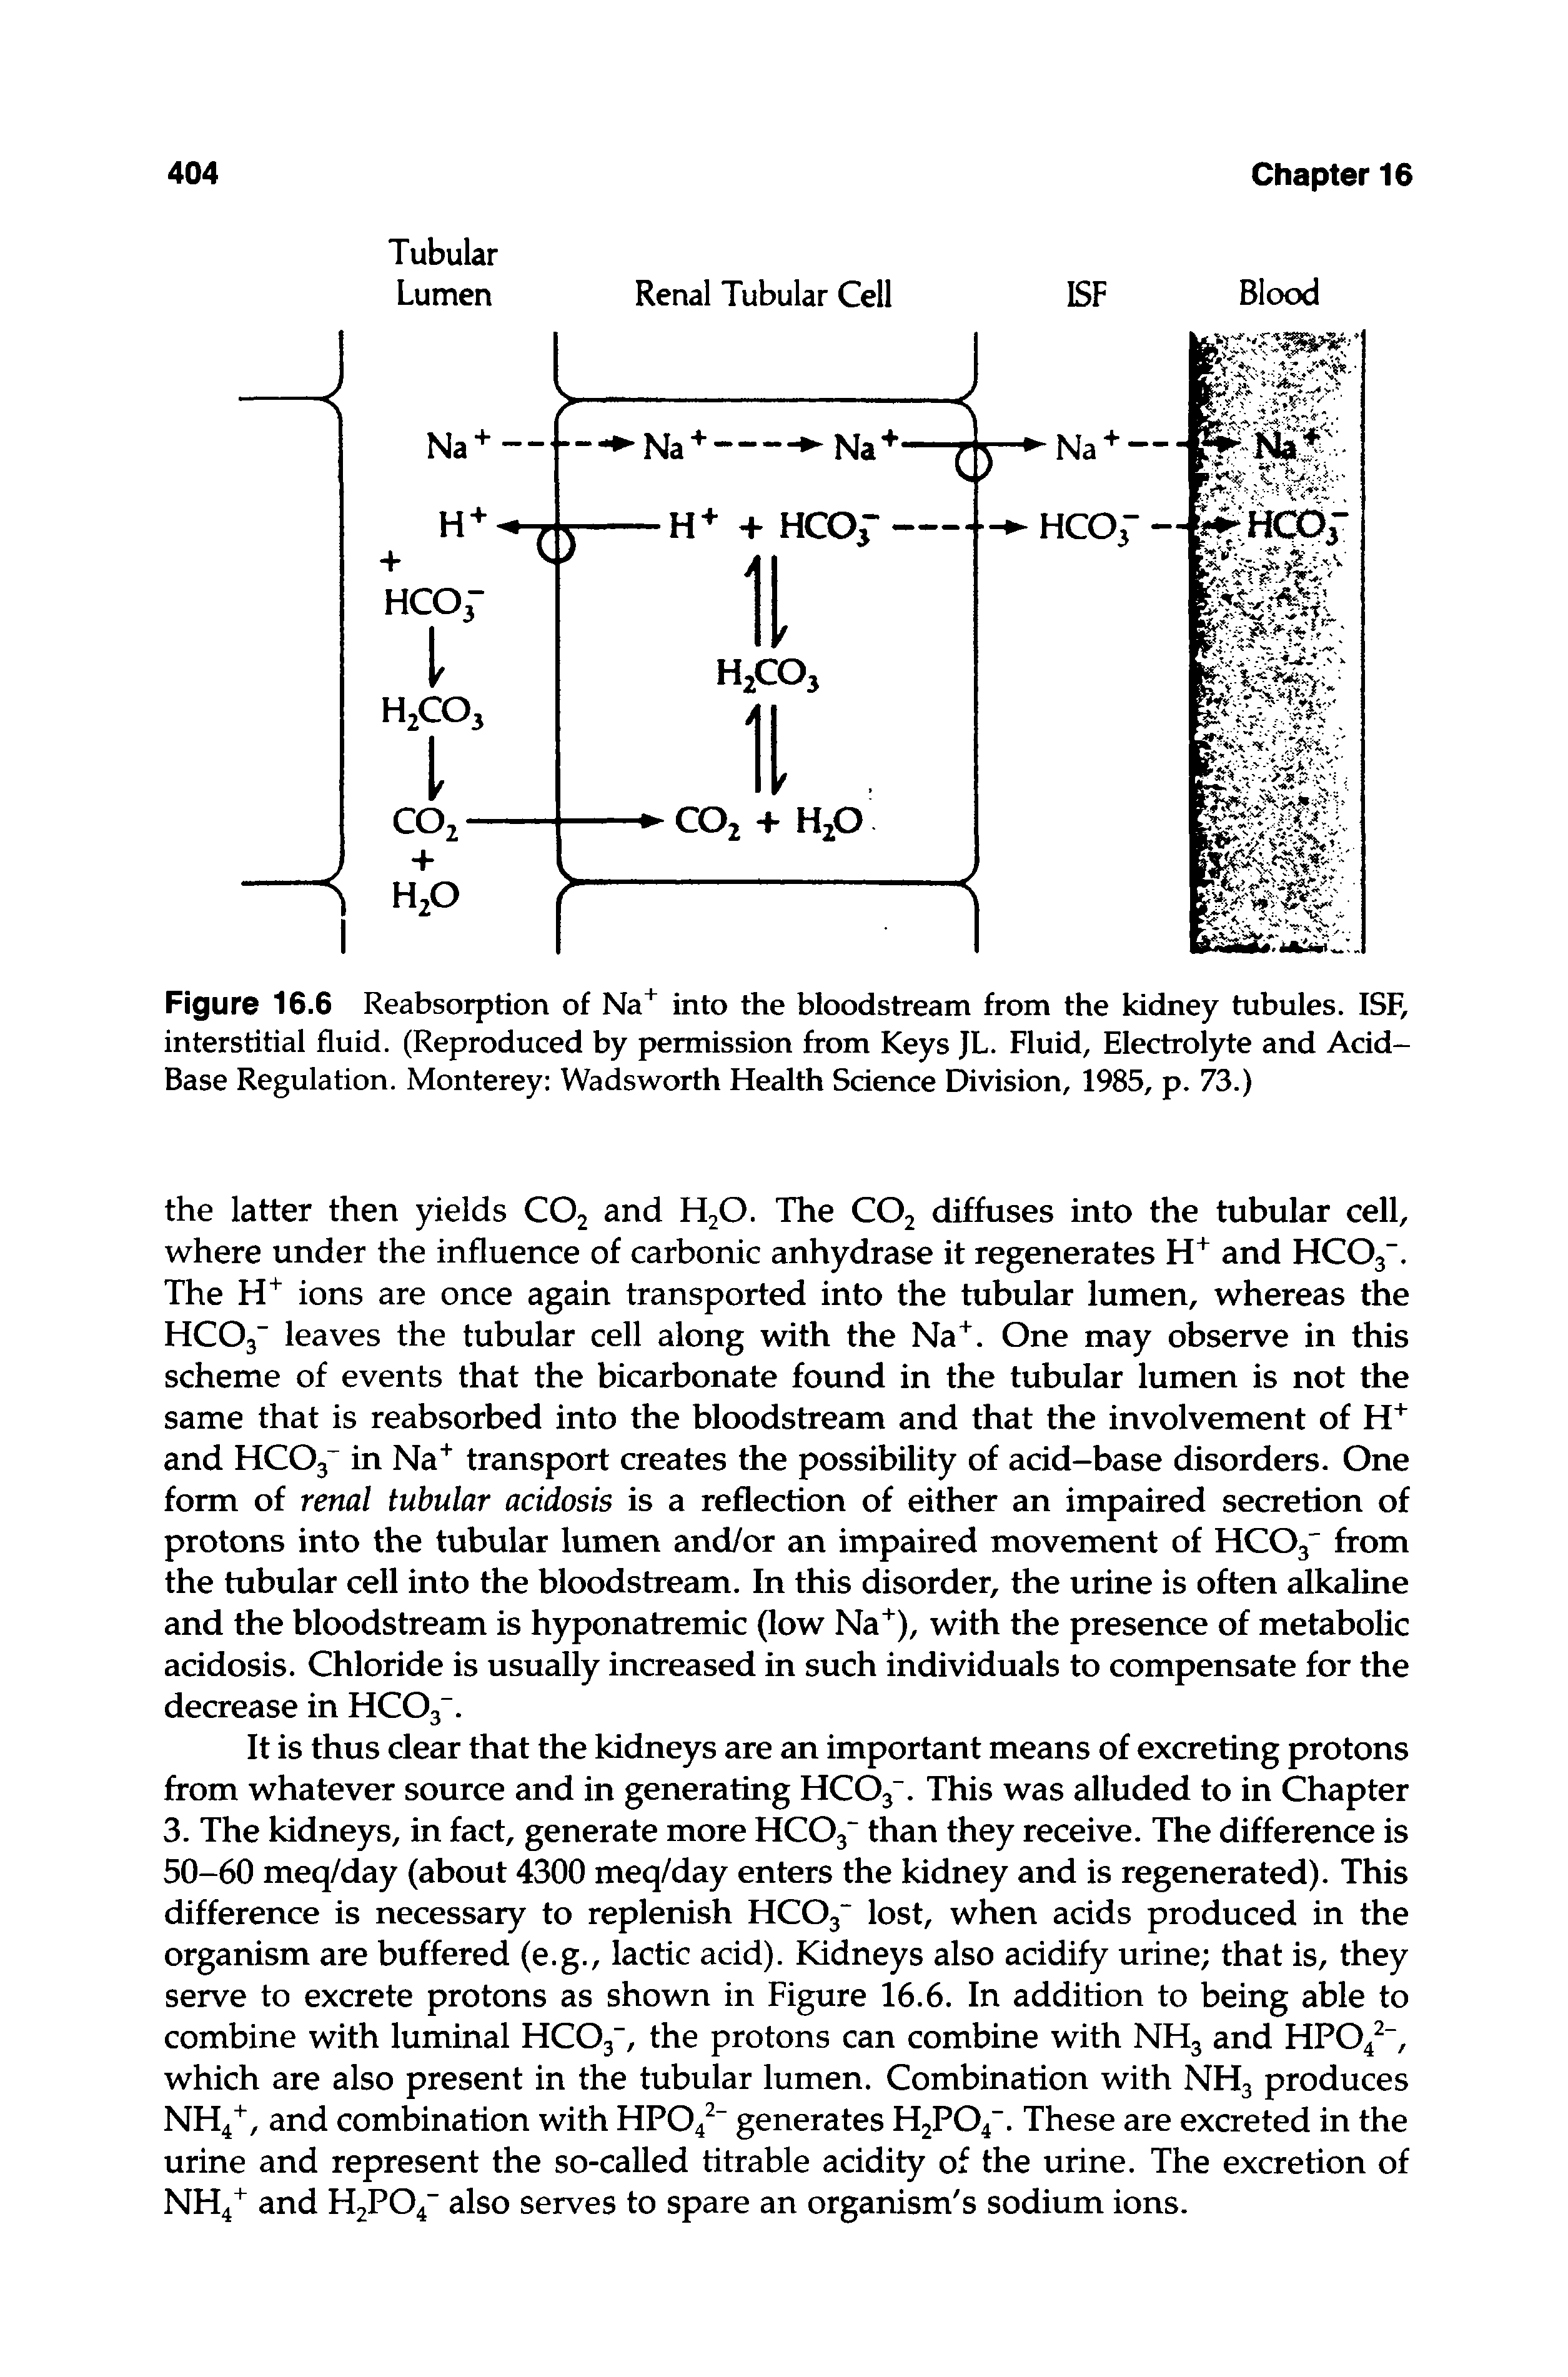 Figure 16.6 Reabsorption of Na+ into the bloodstream from the kidney tubules. ISF, interstitial fluid. (Reproduced by permission from Keys JL. Fluid, Electrolyte and Acid-Base Regulation. Monterey Wadsworth Health Science Division, 1985, p. 73.)...